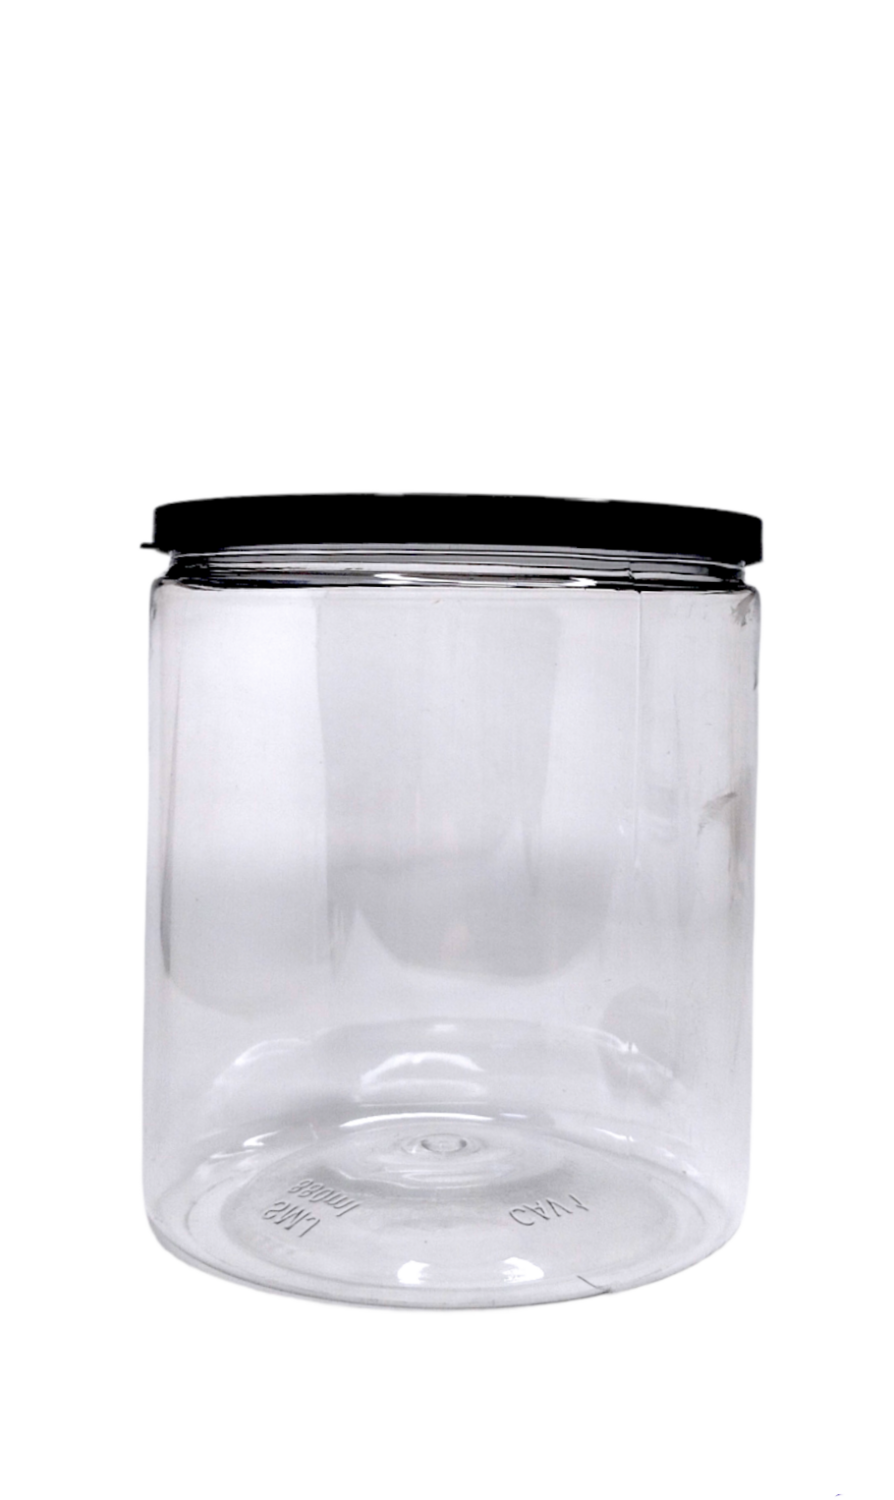 880Ml PET Clear Widemouth Jar with Liner - Black Cap